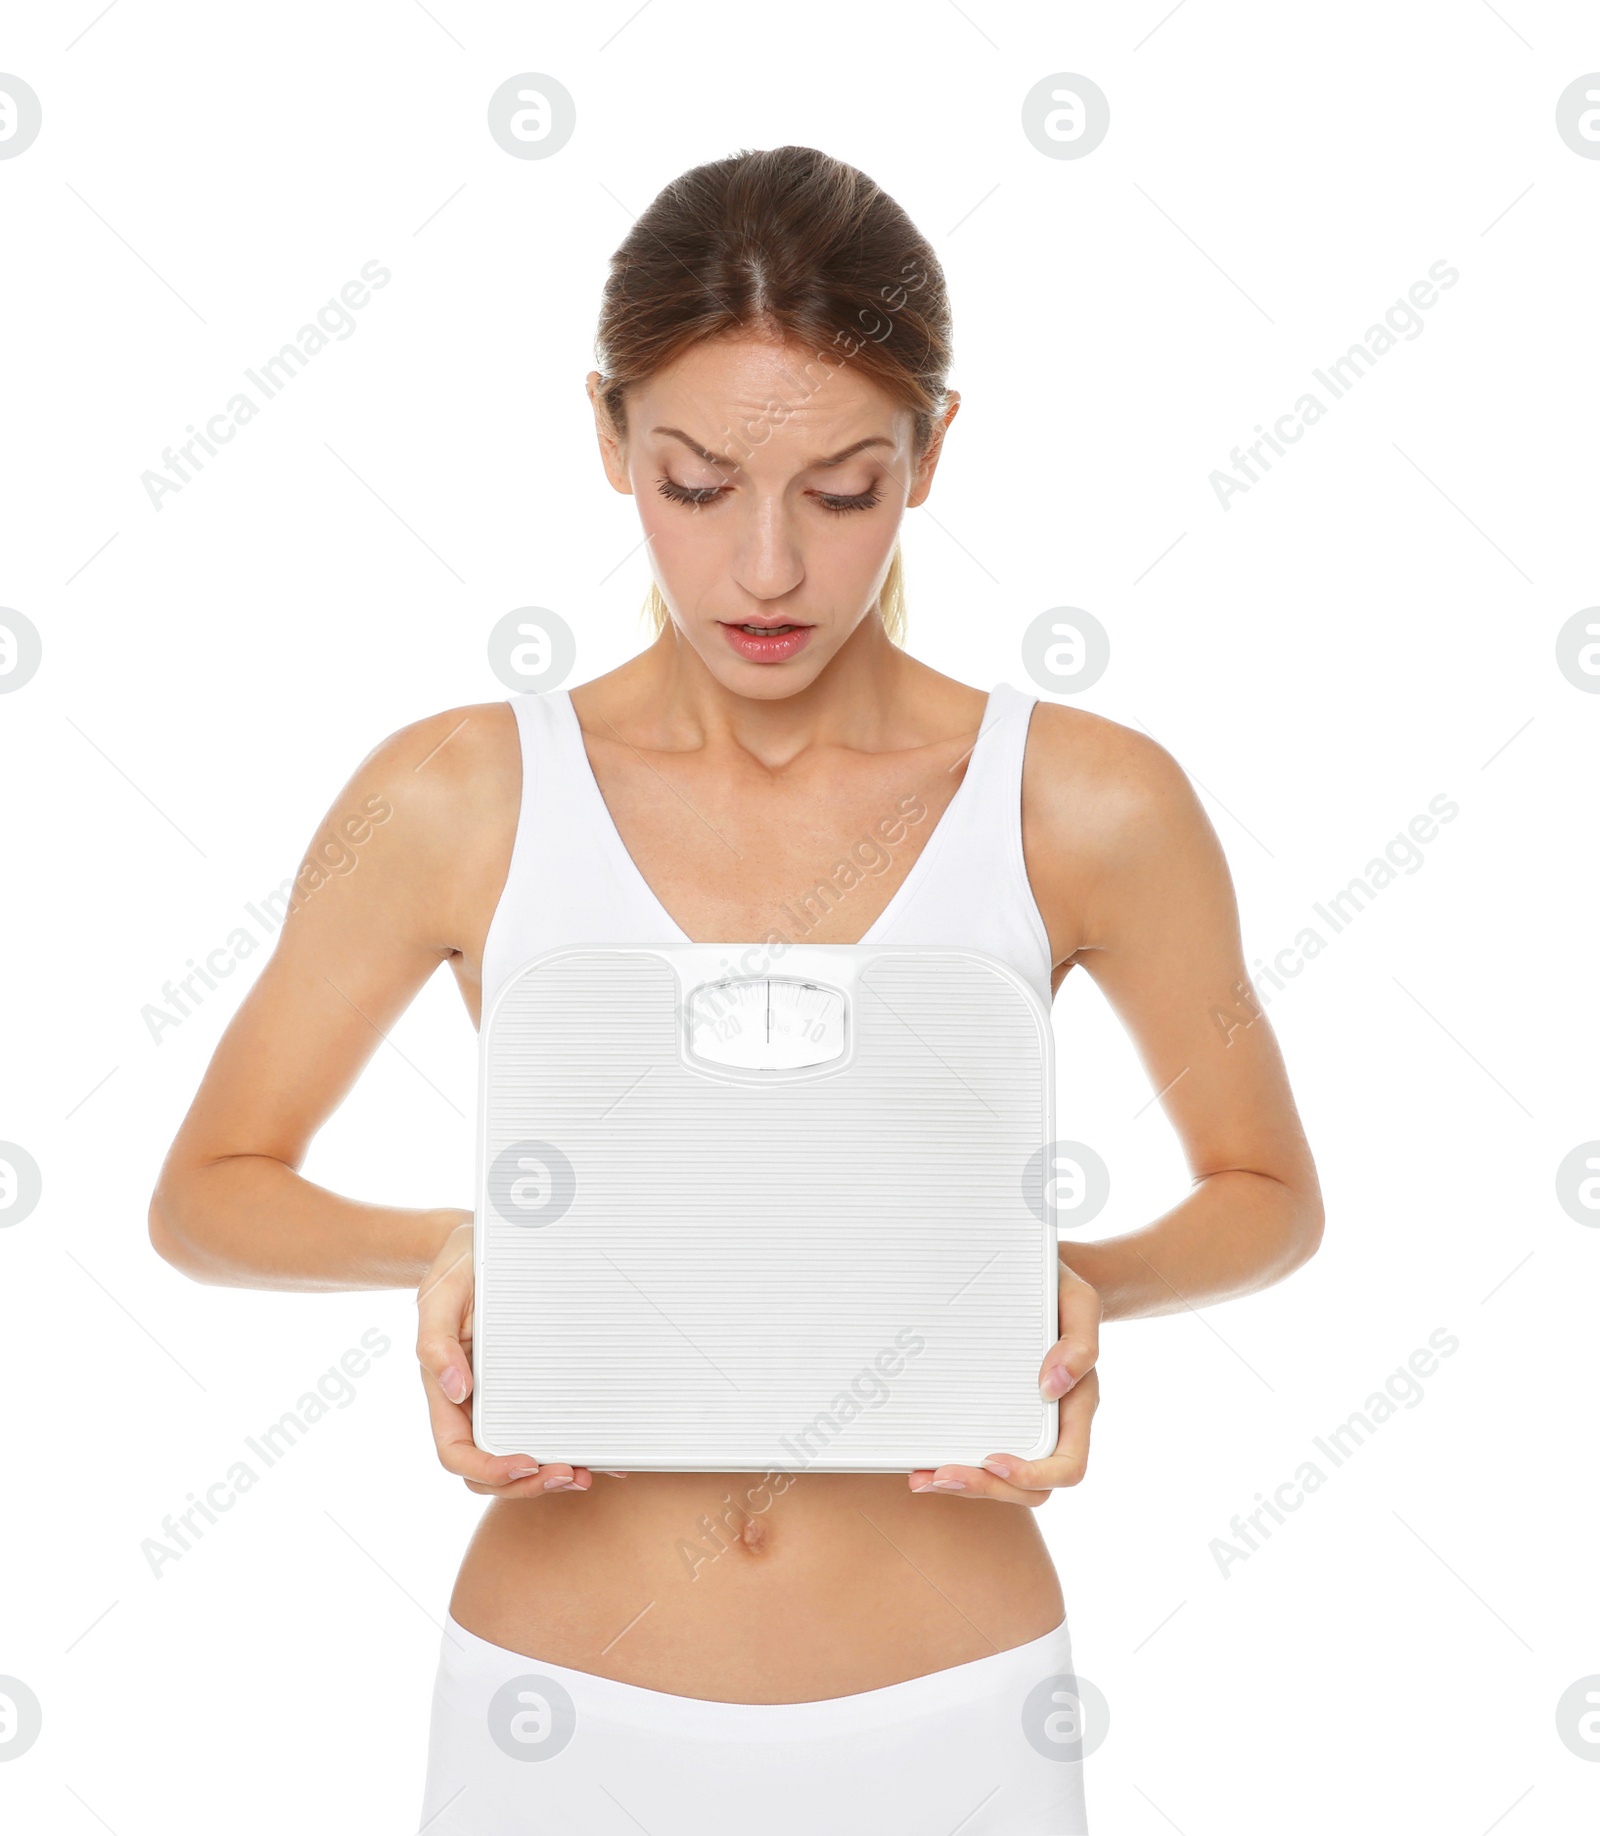 Photo of Worried young woman holding bathroom scales on white background. Weight loss diet